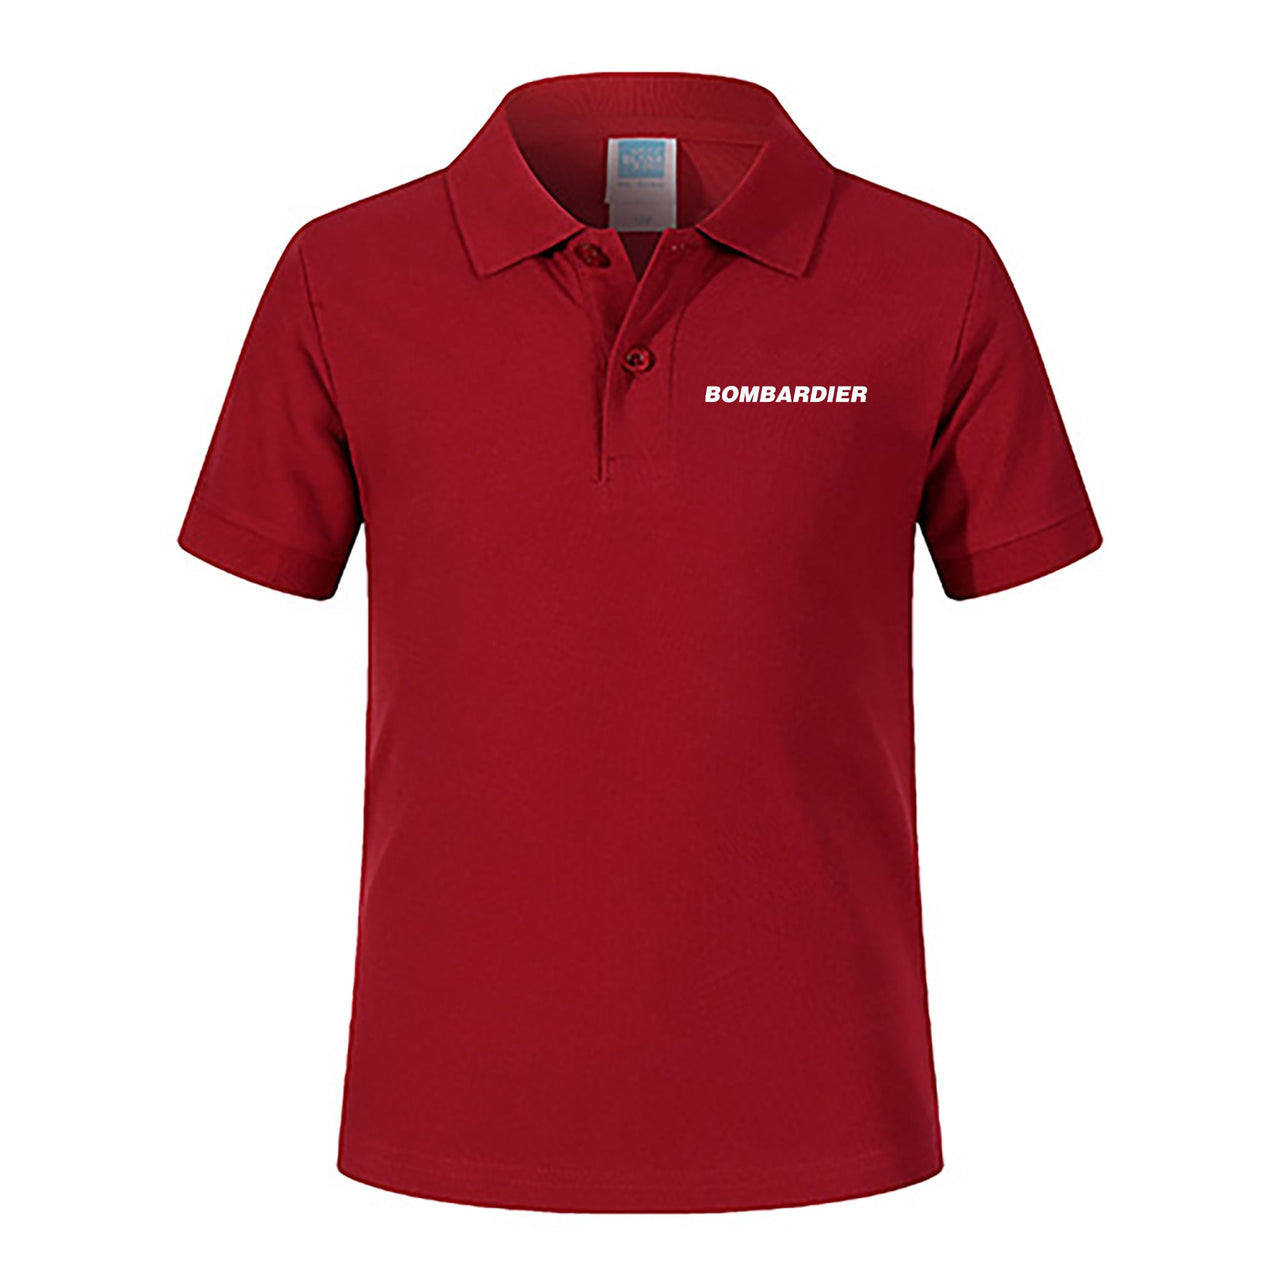 Bombardier & Text Designed Children Polo T-Shirts